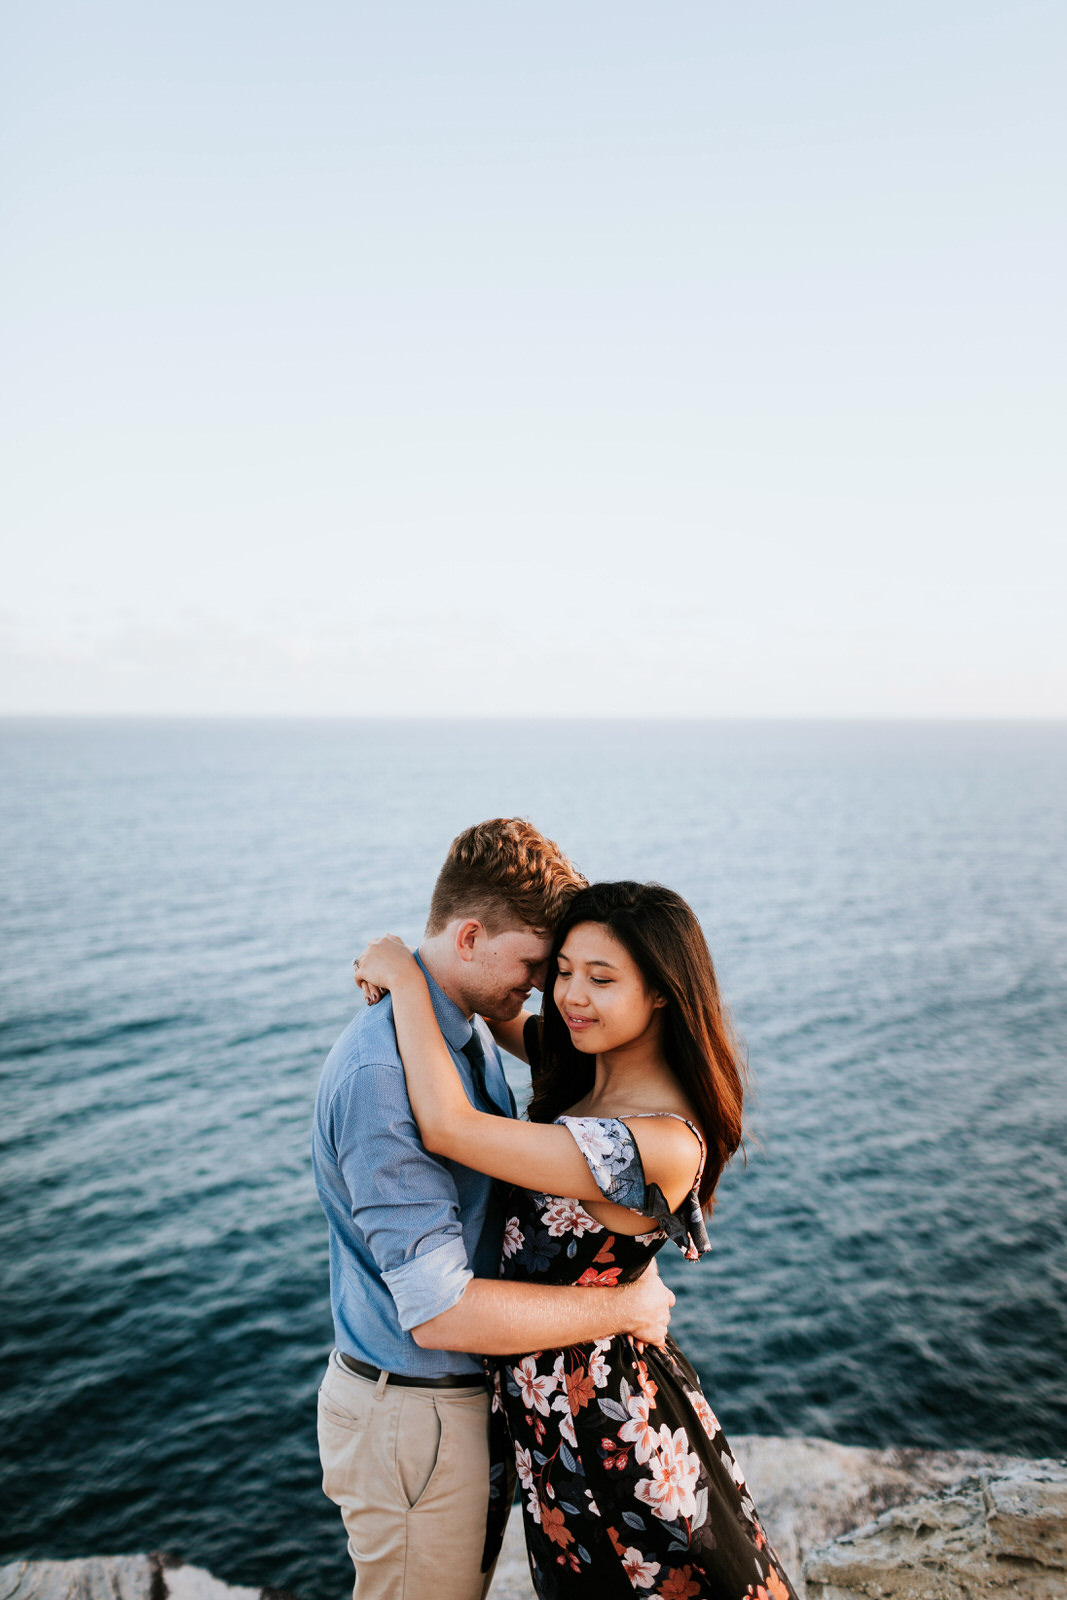 Engagement photographer in Wollongong